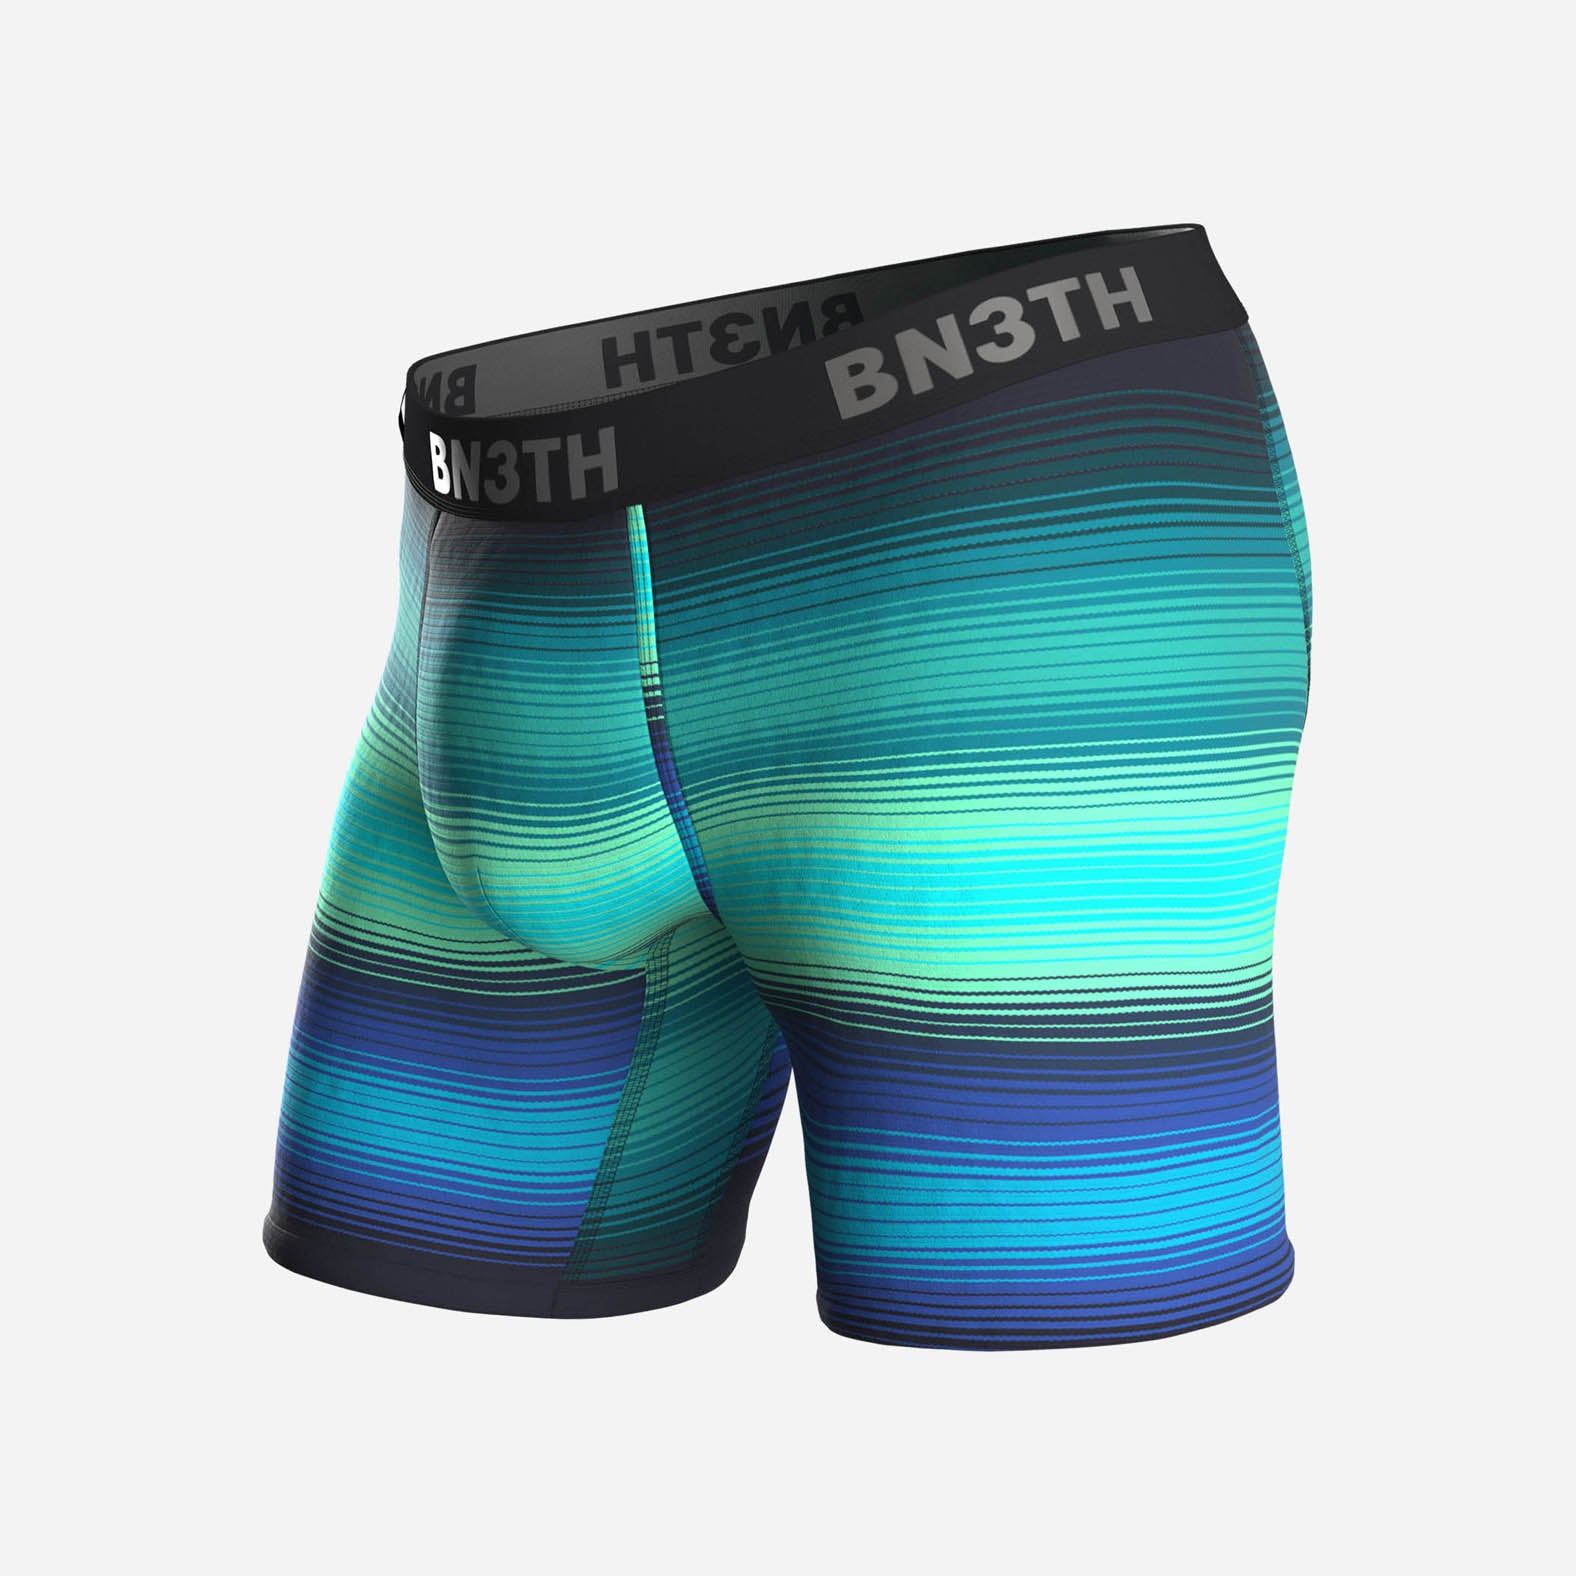 BN3TH Classic Print Boxer Brief Boxers-Buenos Dias — REAL Watersports